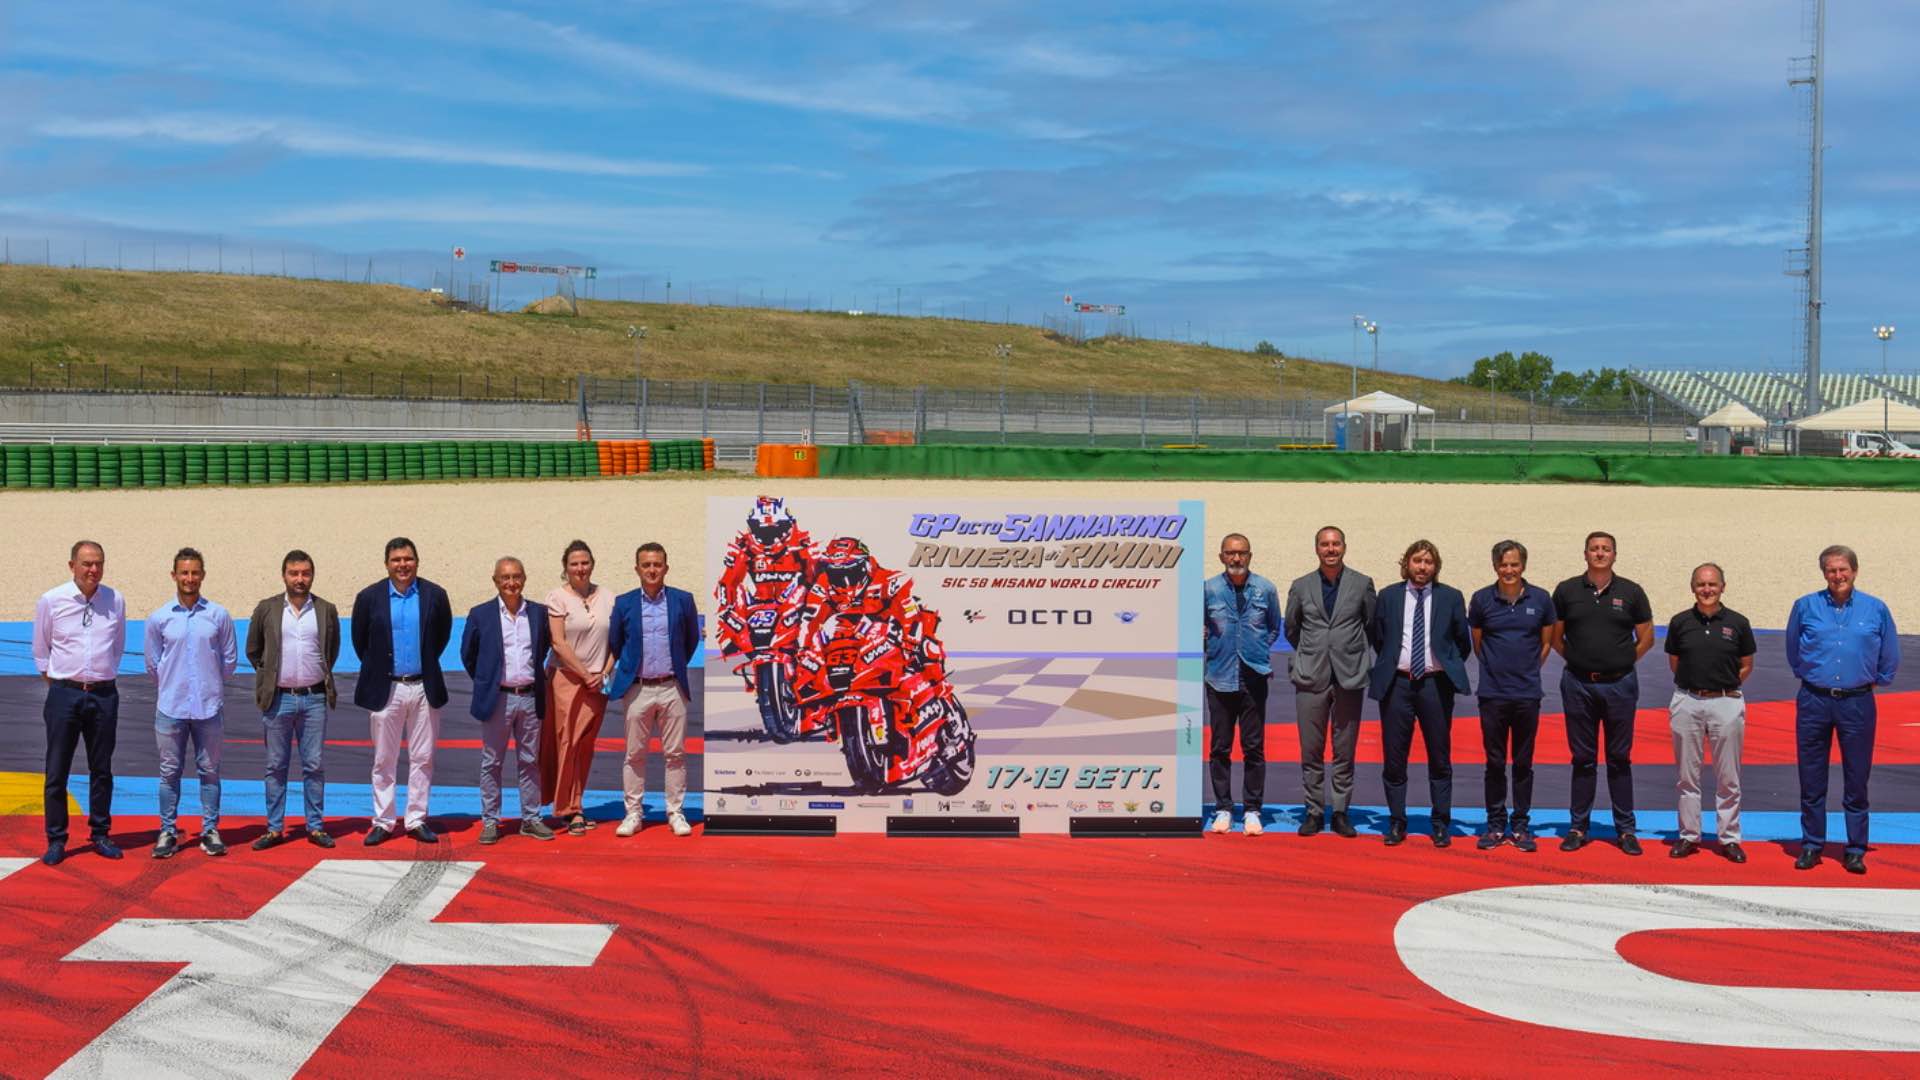 MotoGP returns to Misano. The promotion of the great event starts from the Official Poster.